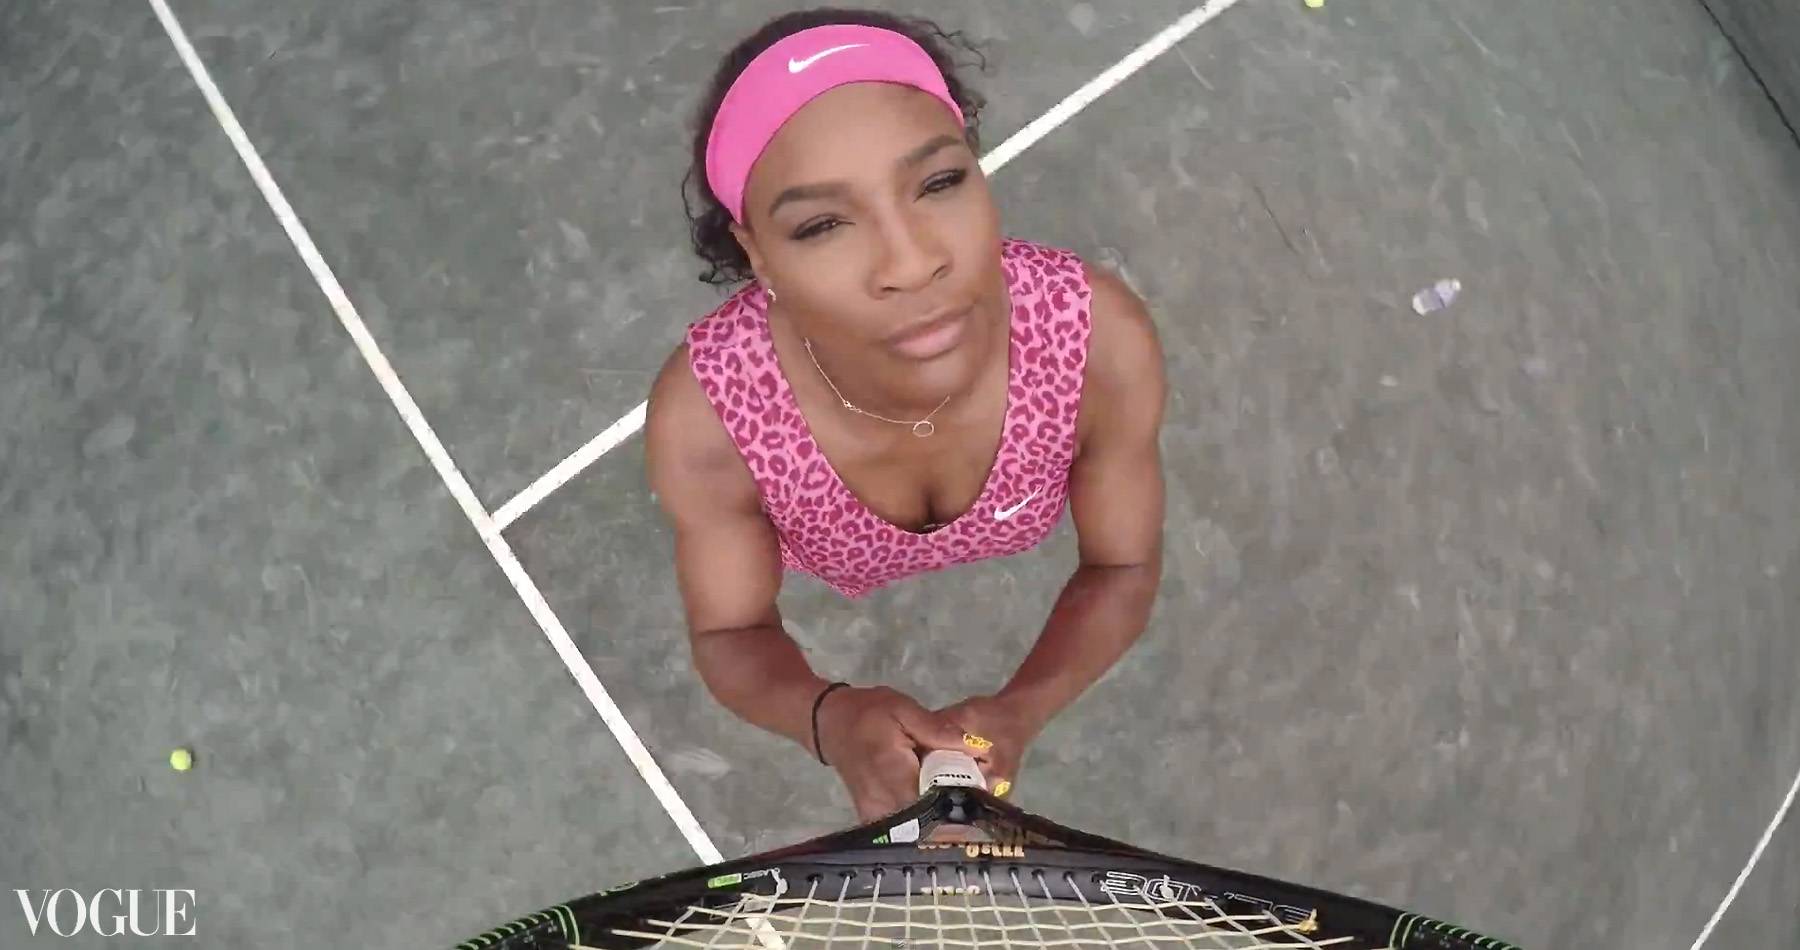 Serena Williams Takes on '7/11' - Serena Williams teamed up with Vogue to film her own version of Beyonce's &quot;7/11.&quot; Williams, however, gallivanted around a tennis court instead of a hotel. Watch it here.&nbsp;   (Photo: VOGUE via YouTube.com)